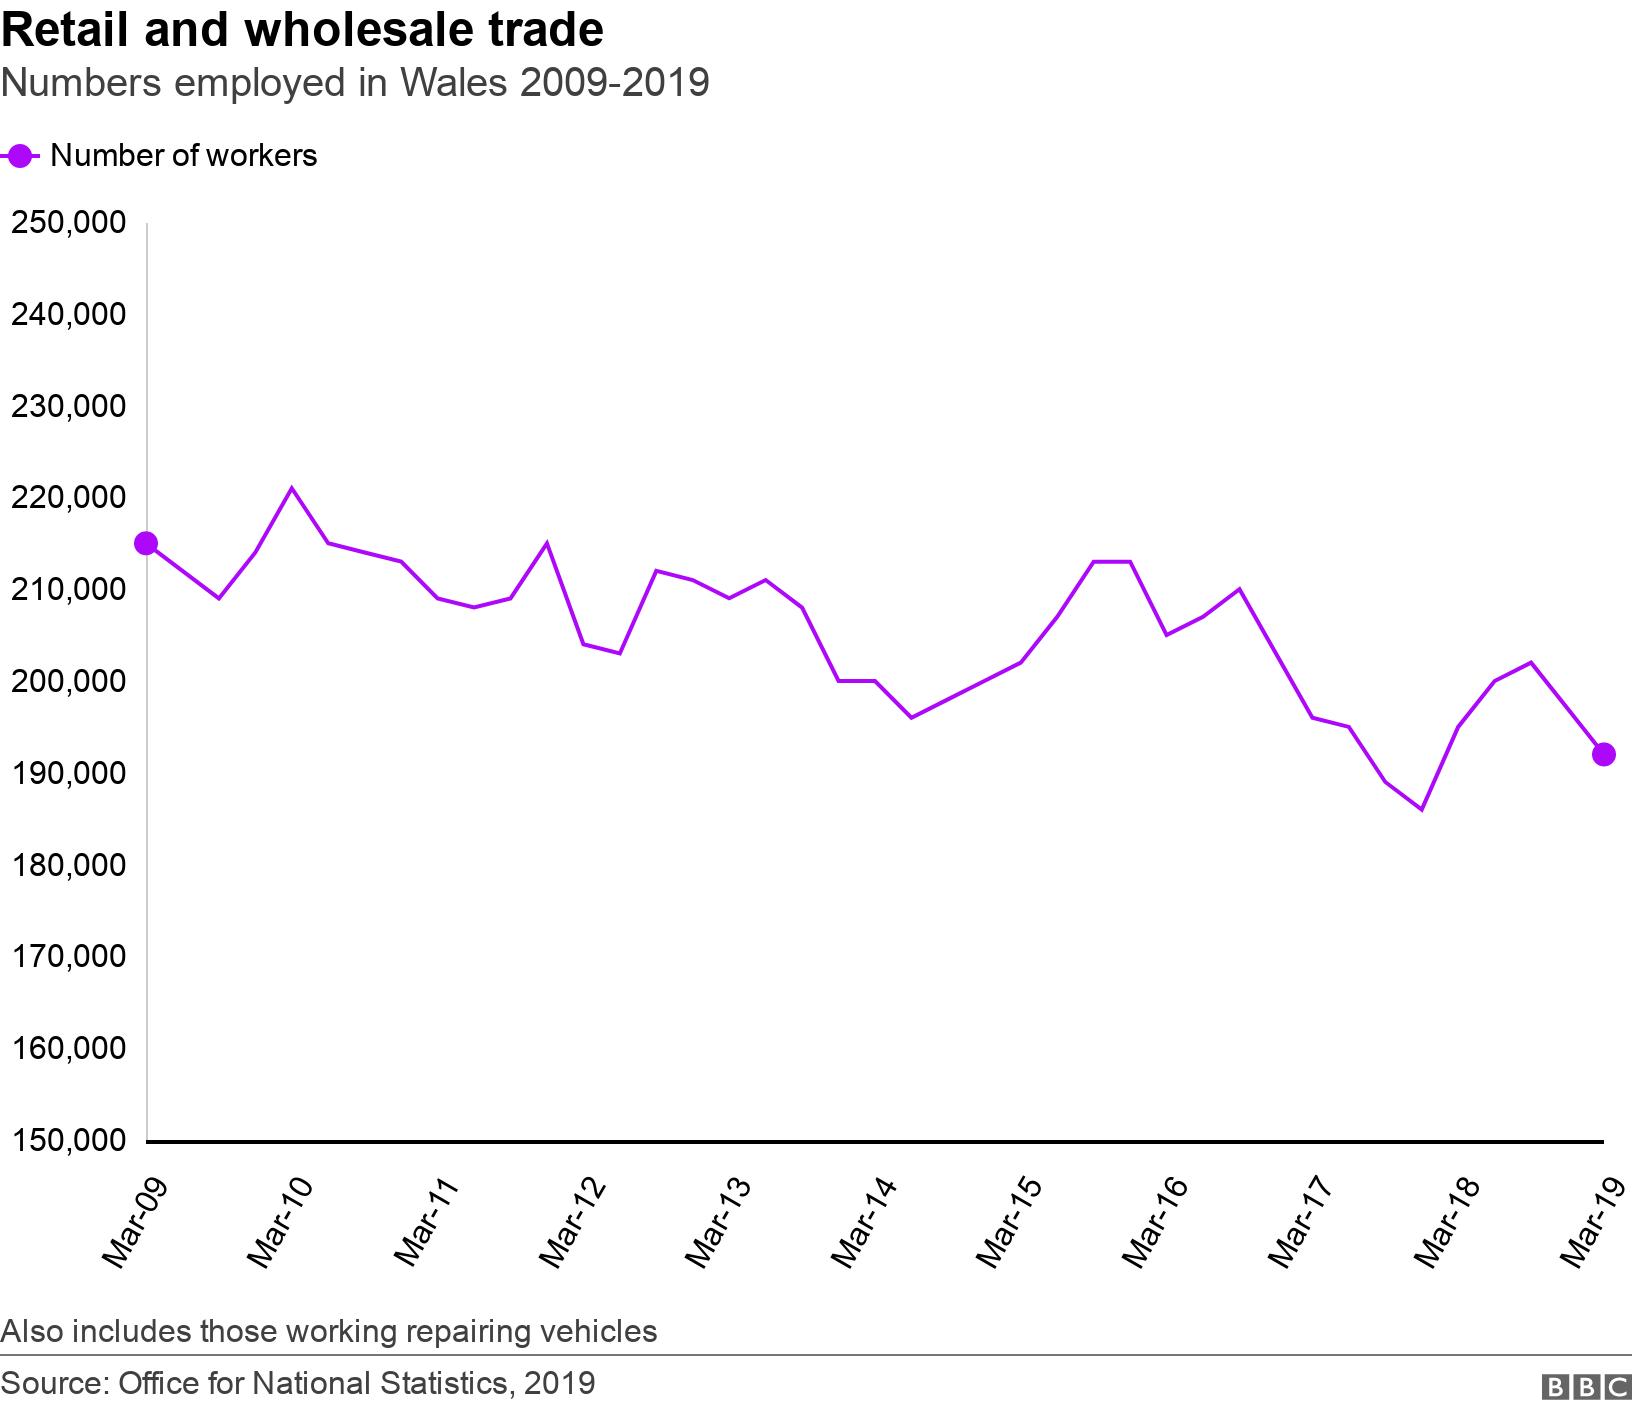 Retail and wholesale trade. Numbers employed in Wales 2009-2019. Also includes those working repairing vehicles.